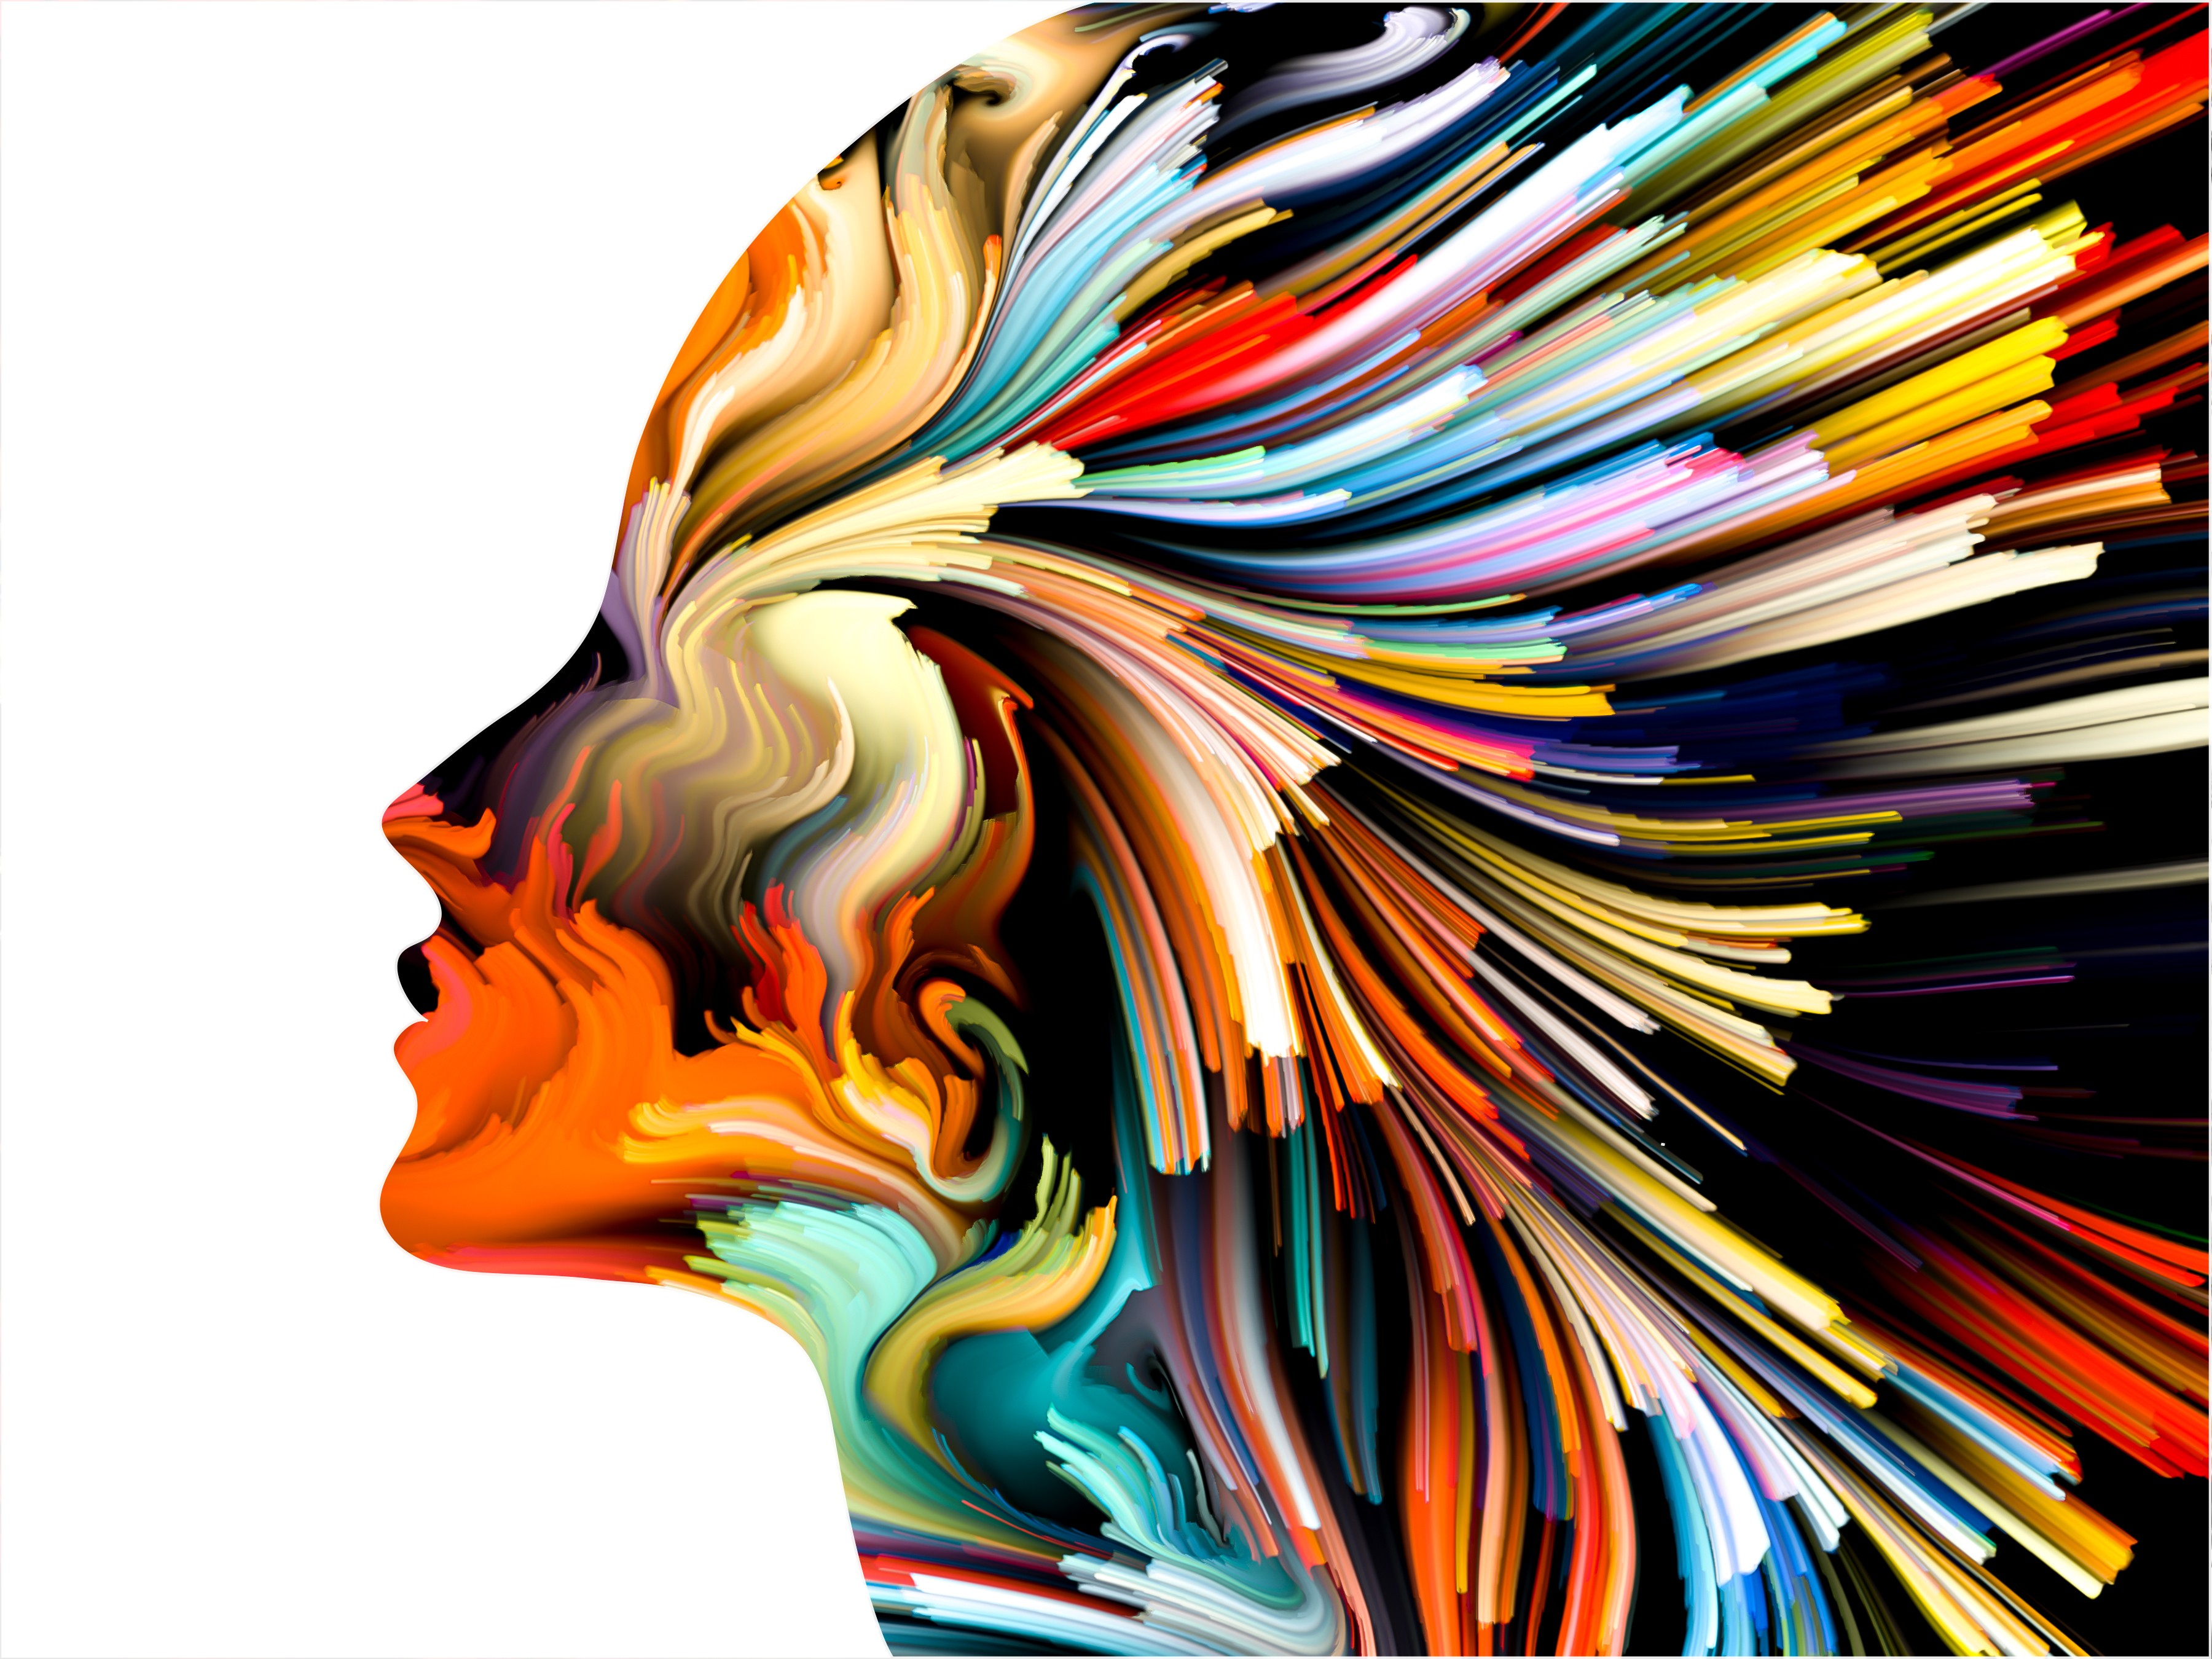 women, Profile, White Background, Abstract, Artwork, Colorful Wallpaper